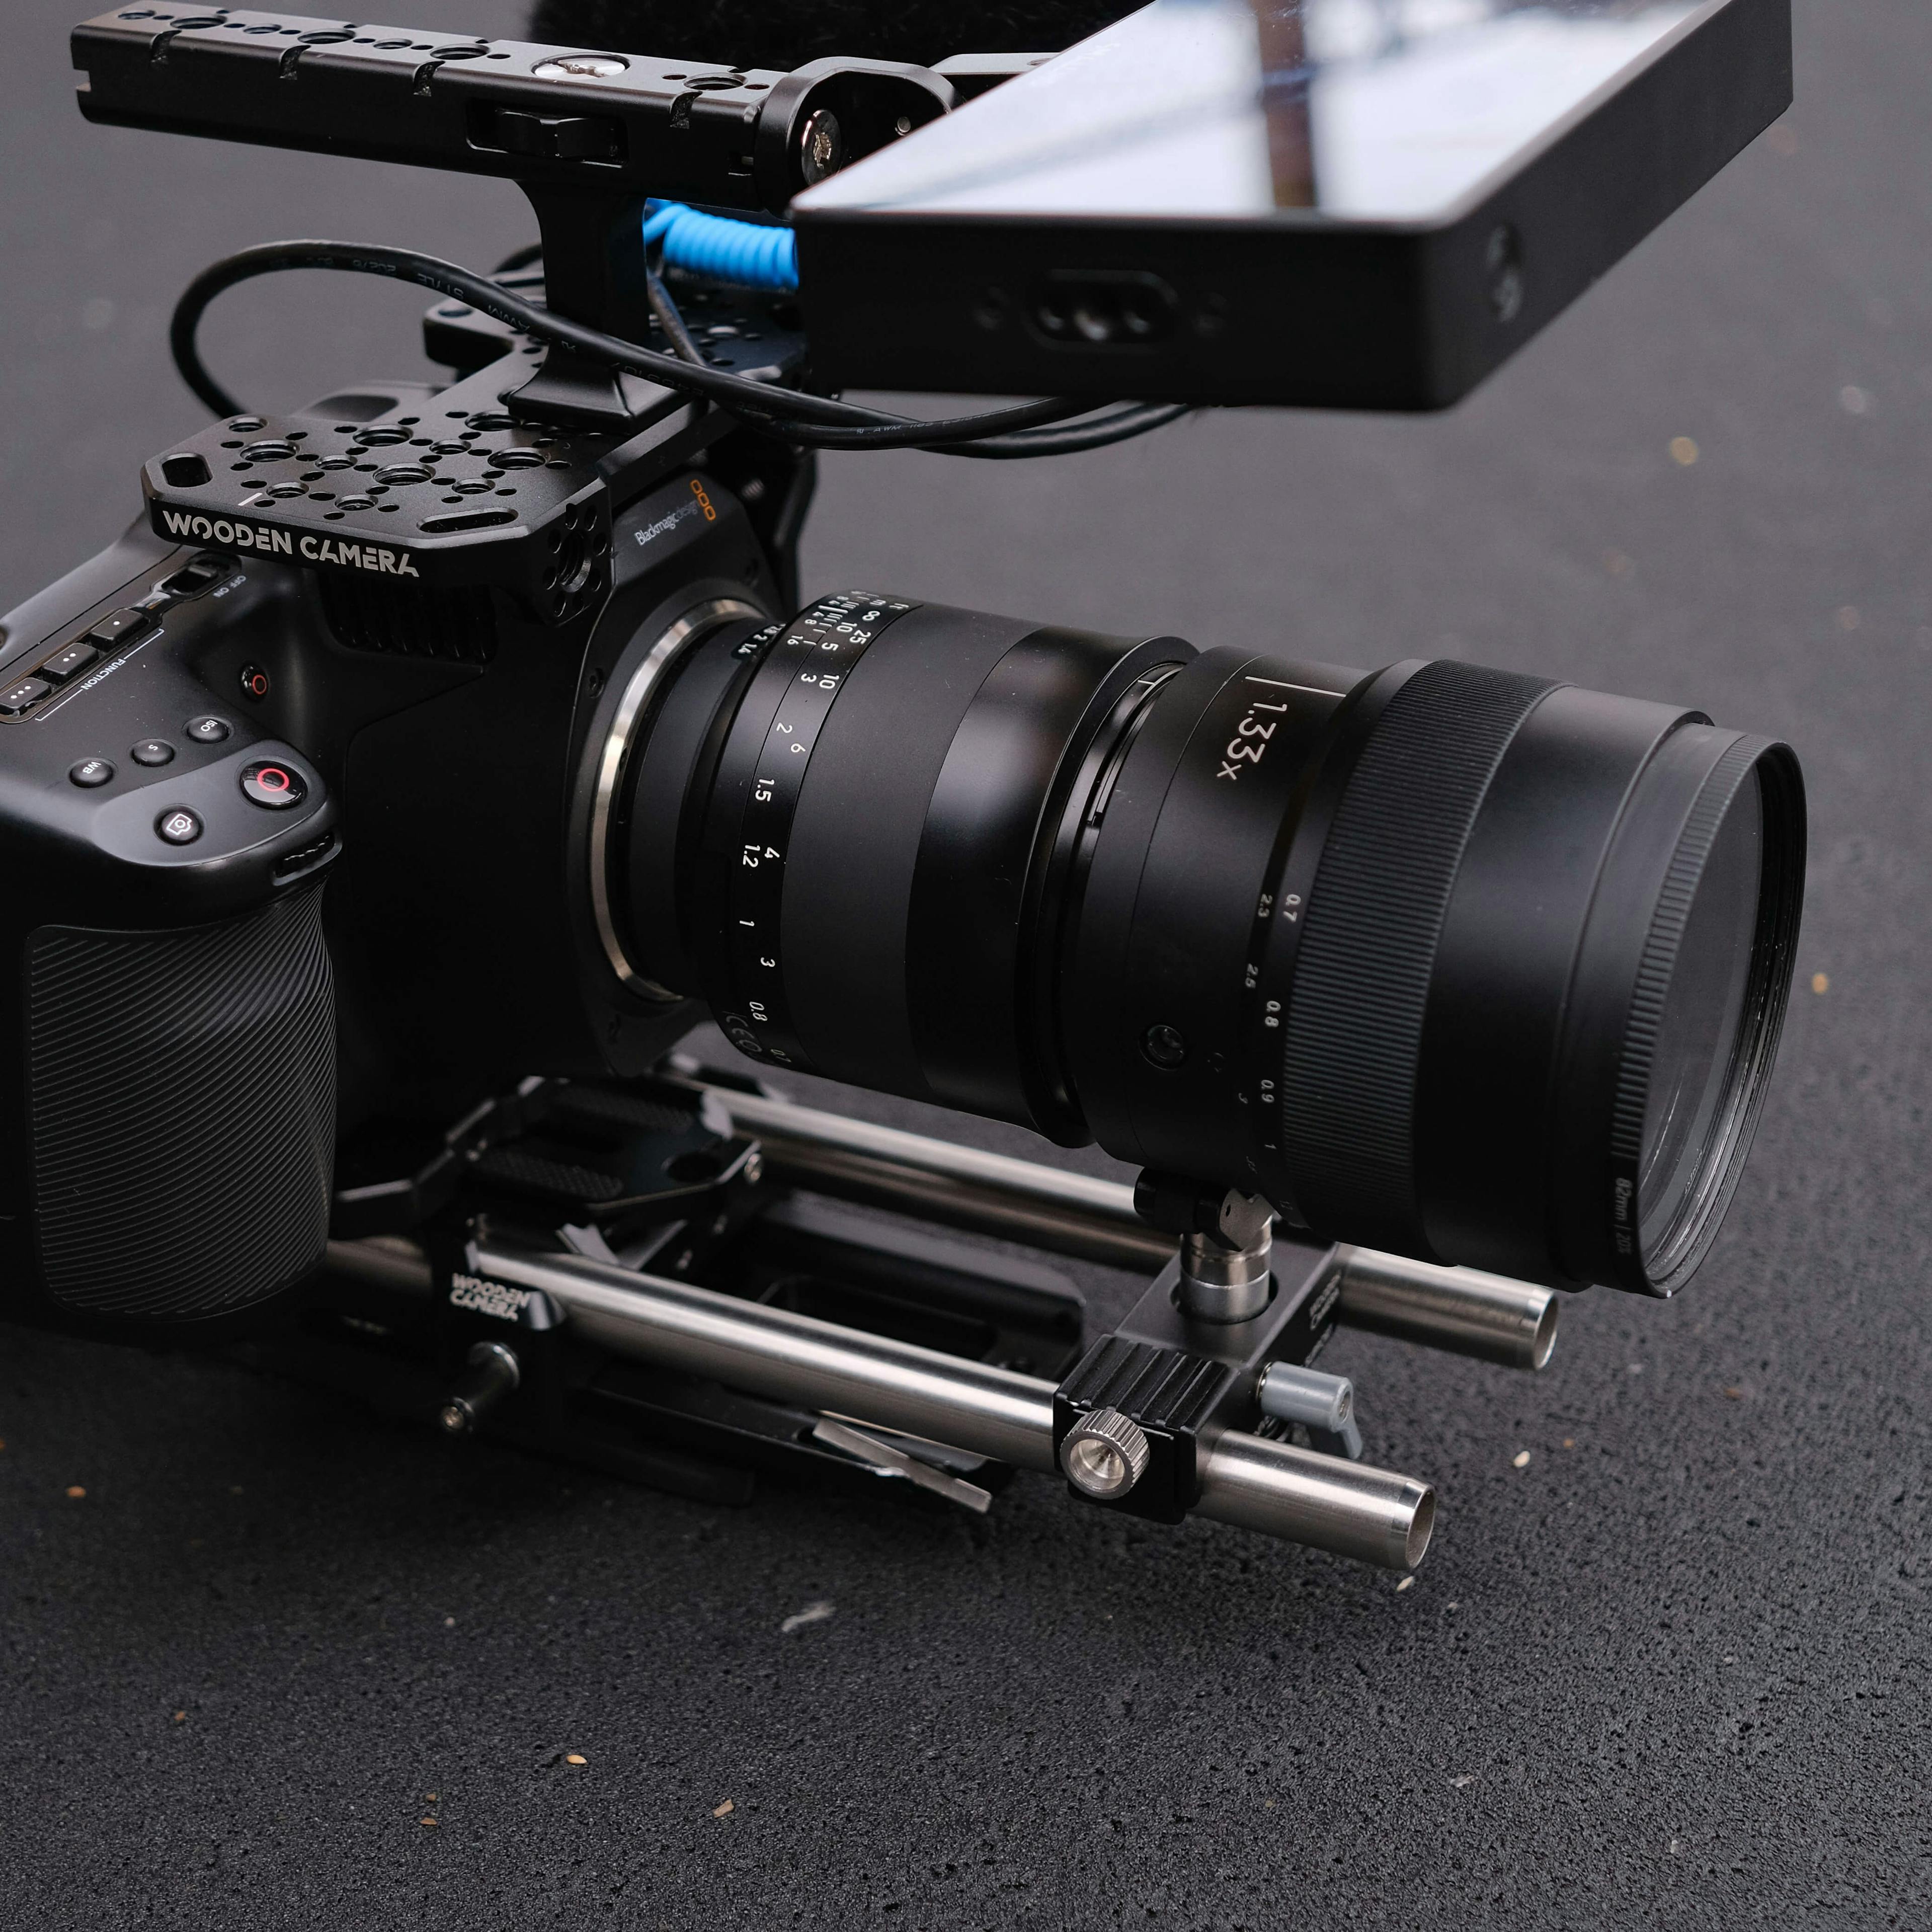 Rigged up Moment 1.33x Anamorphic Adapter.